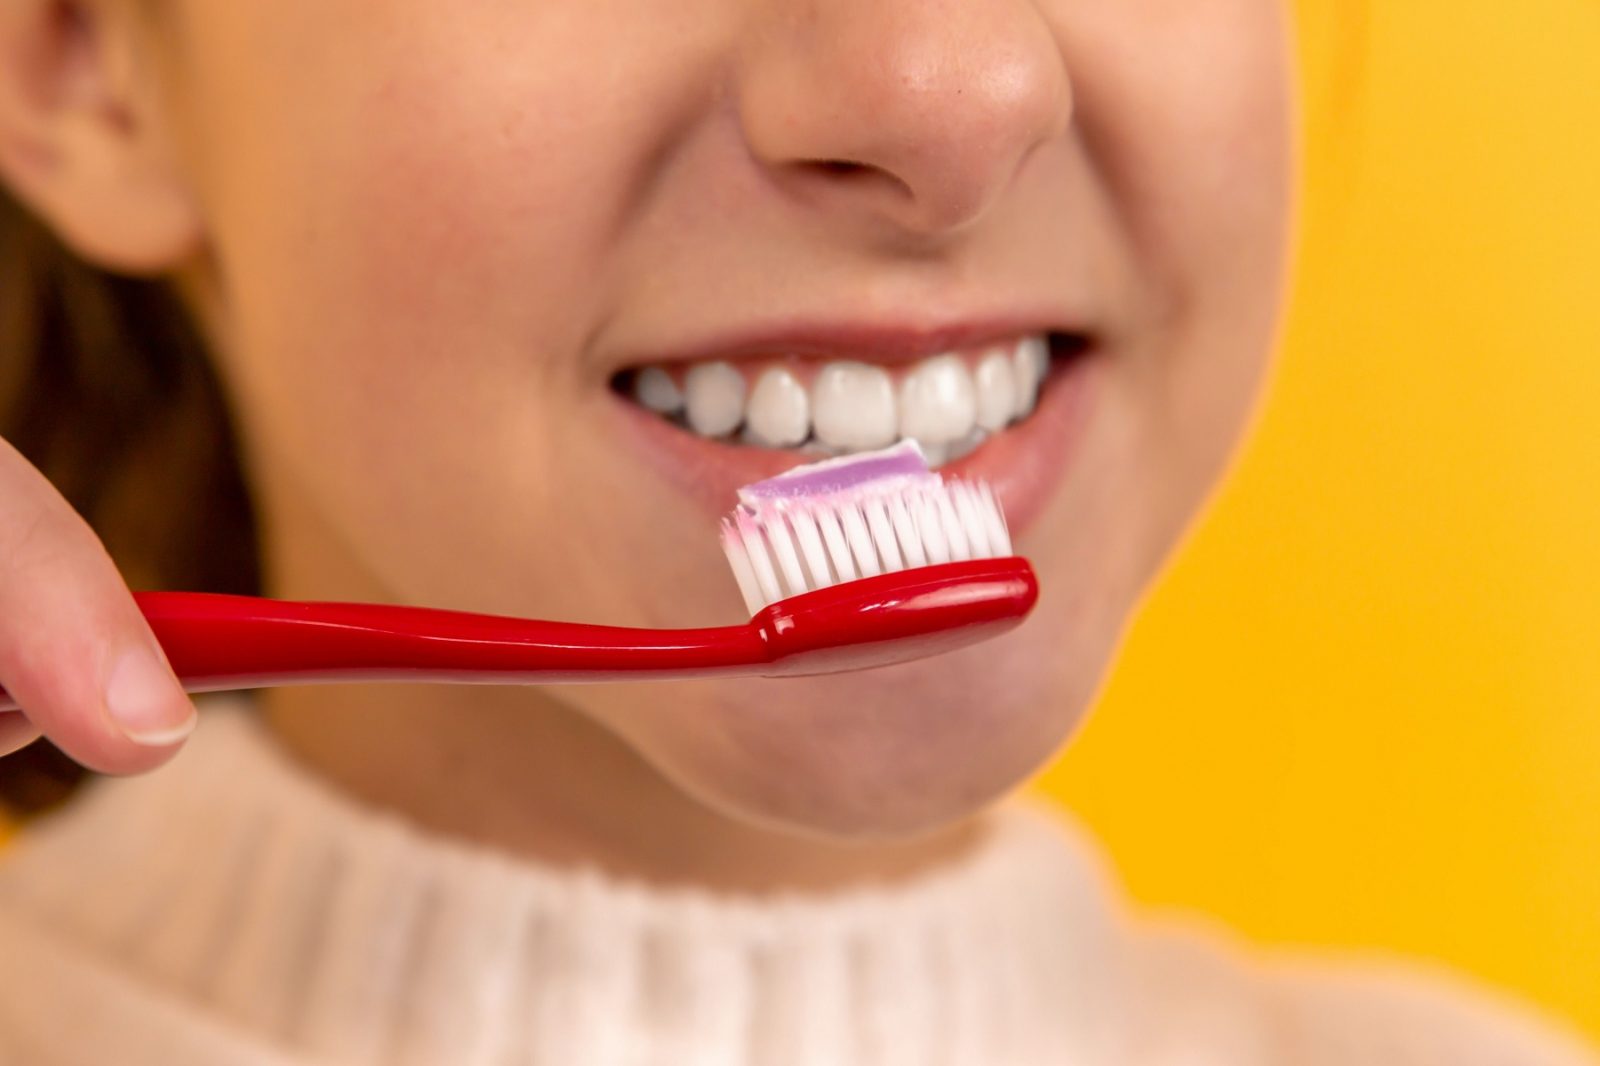 How to Take Care of Your Teeth? Tips to Make Them Strong and Beautiful